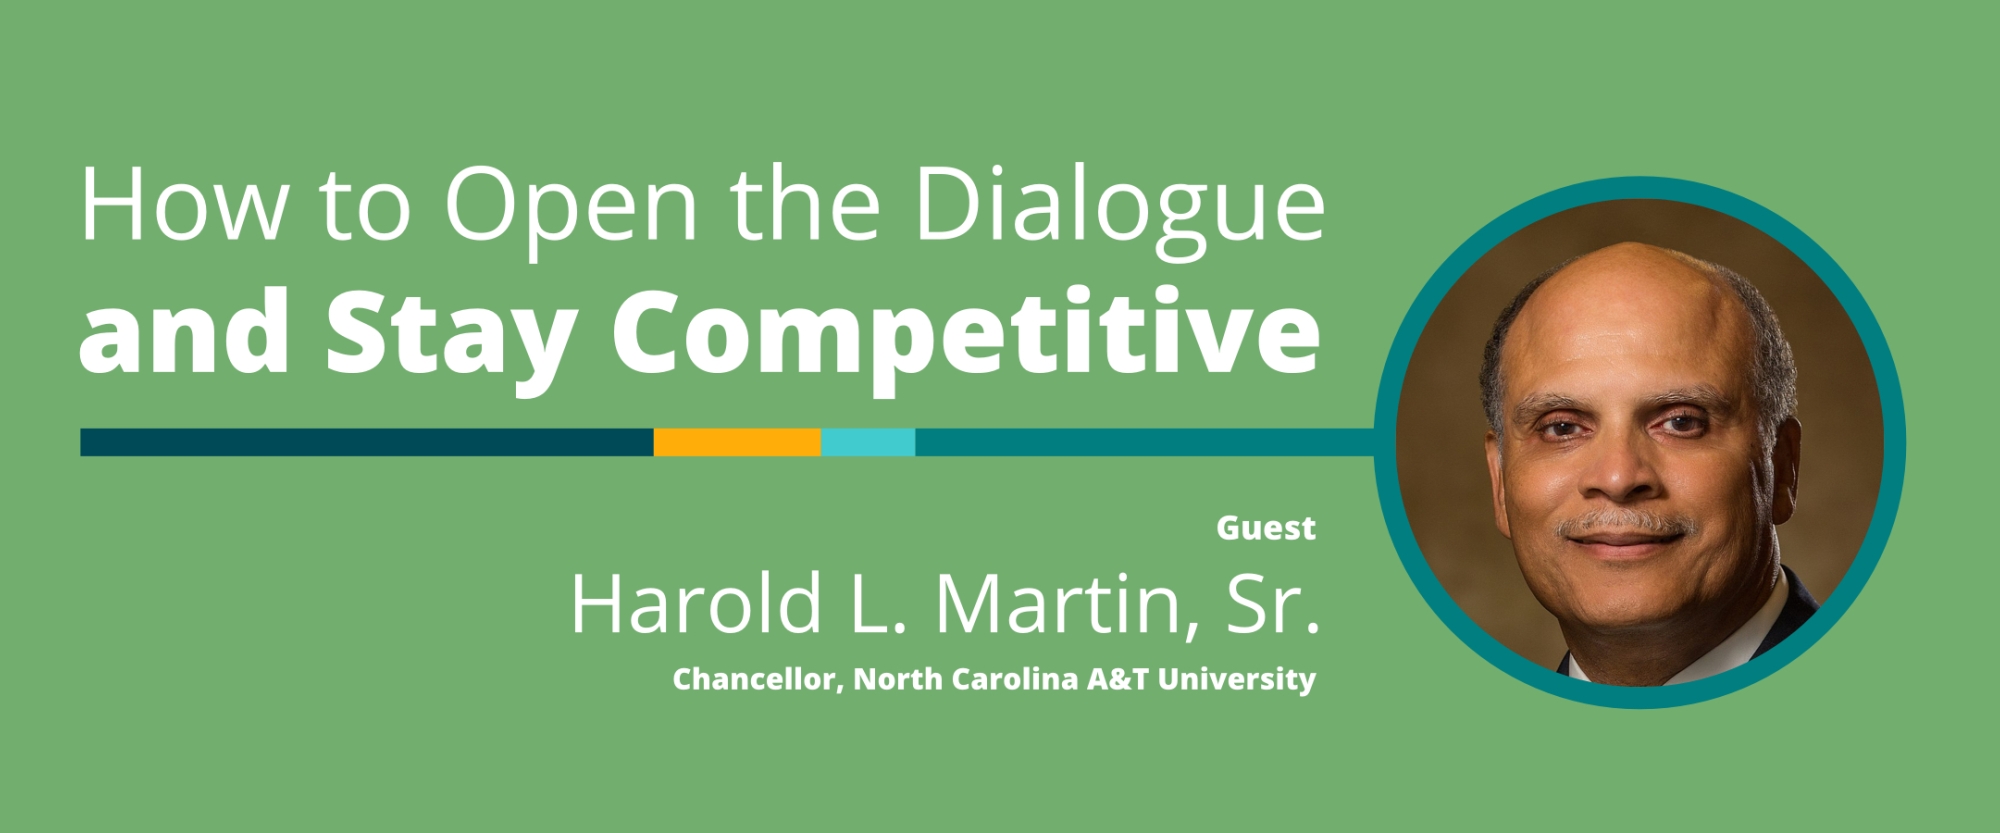 How to Open the Dialogue and Stay Competitive